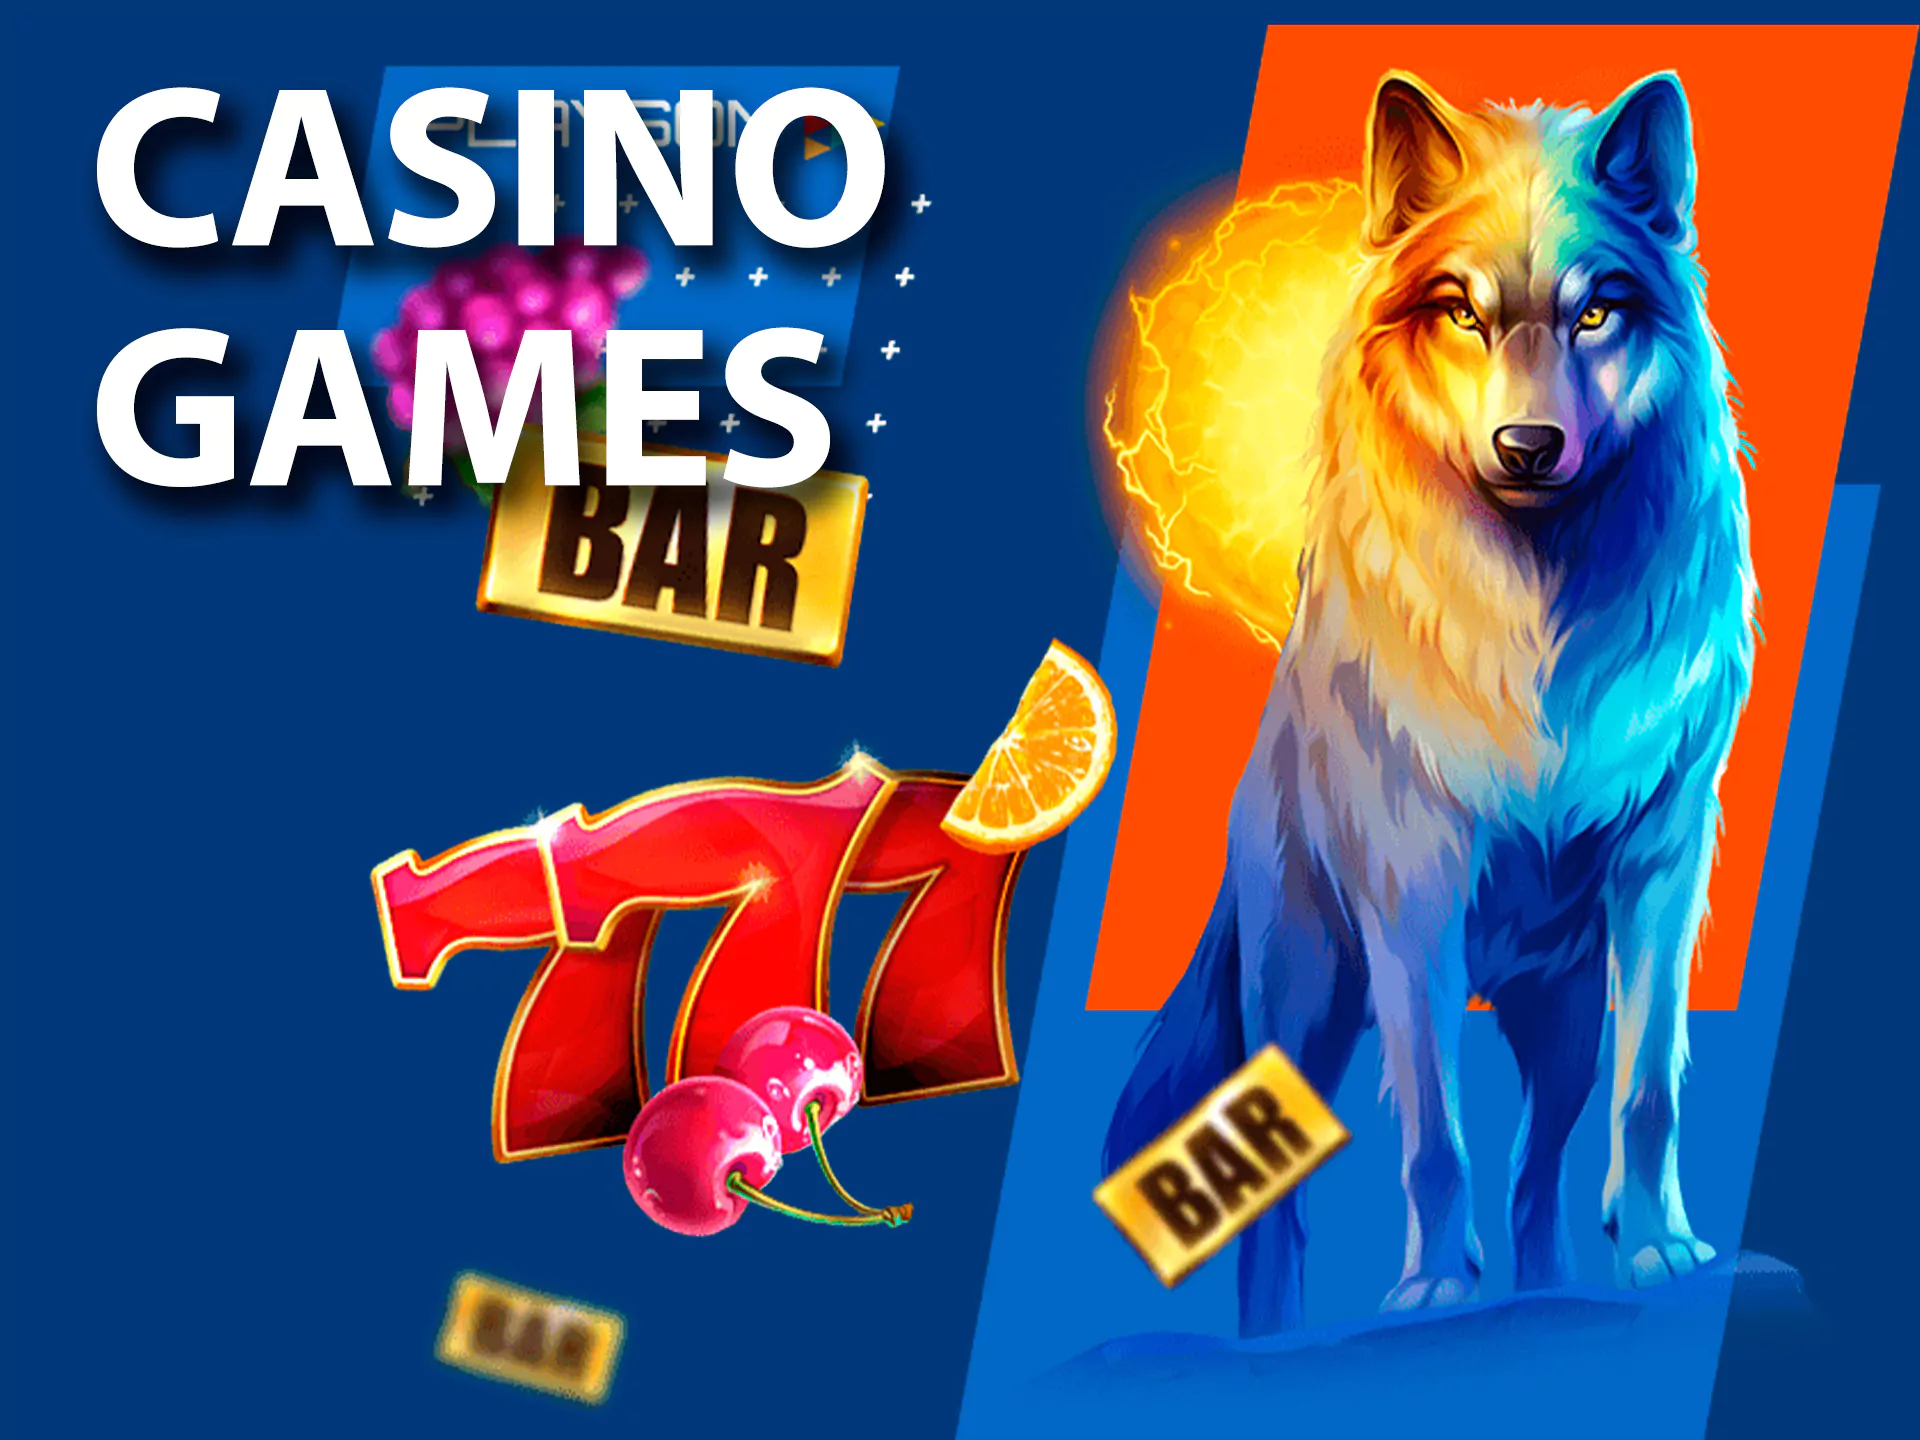 Except betting, you can play casino games at Mostbet.